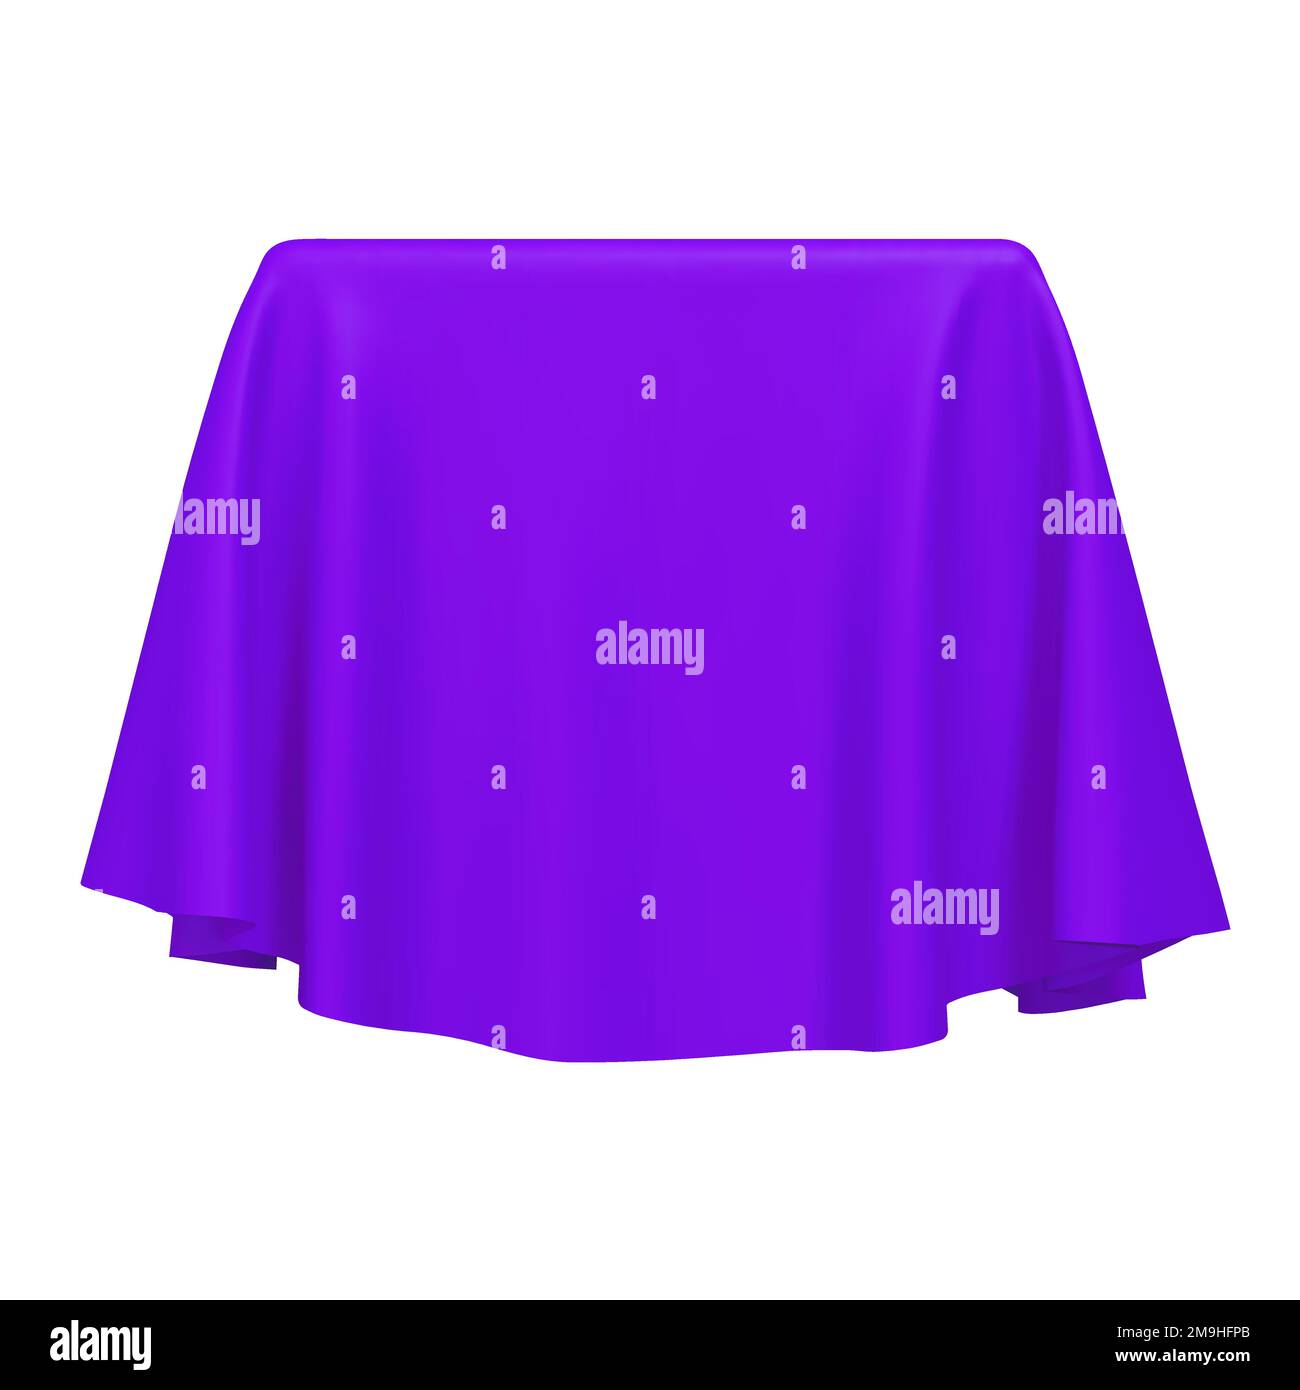 Purple fabric covering a cube or rectangular shape Stock Vector